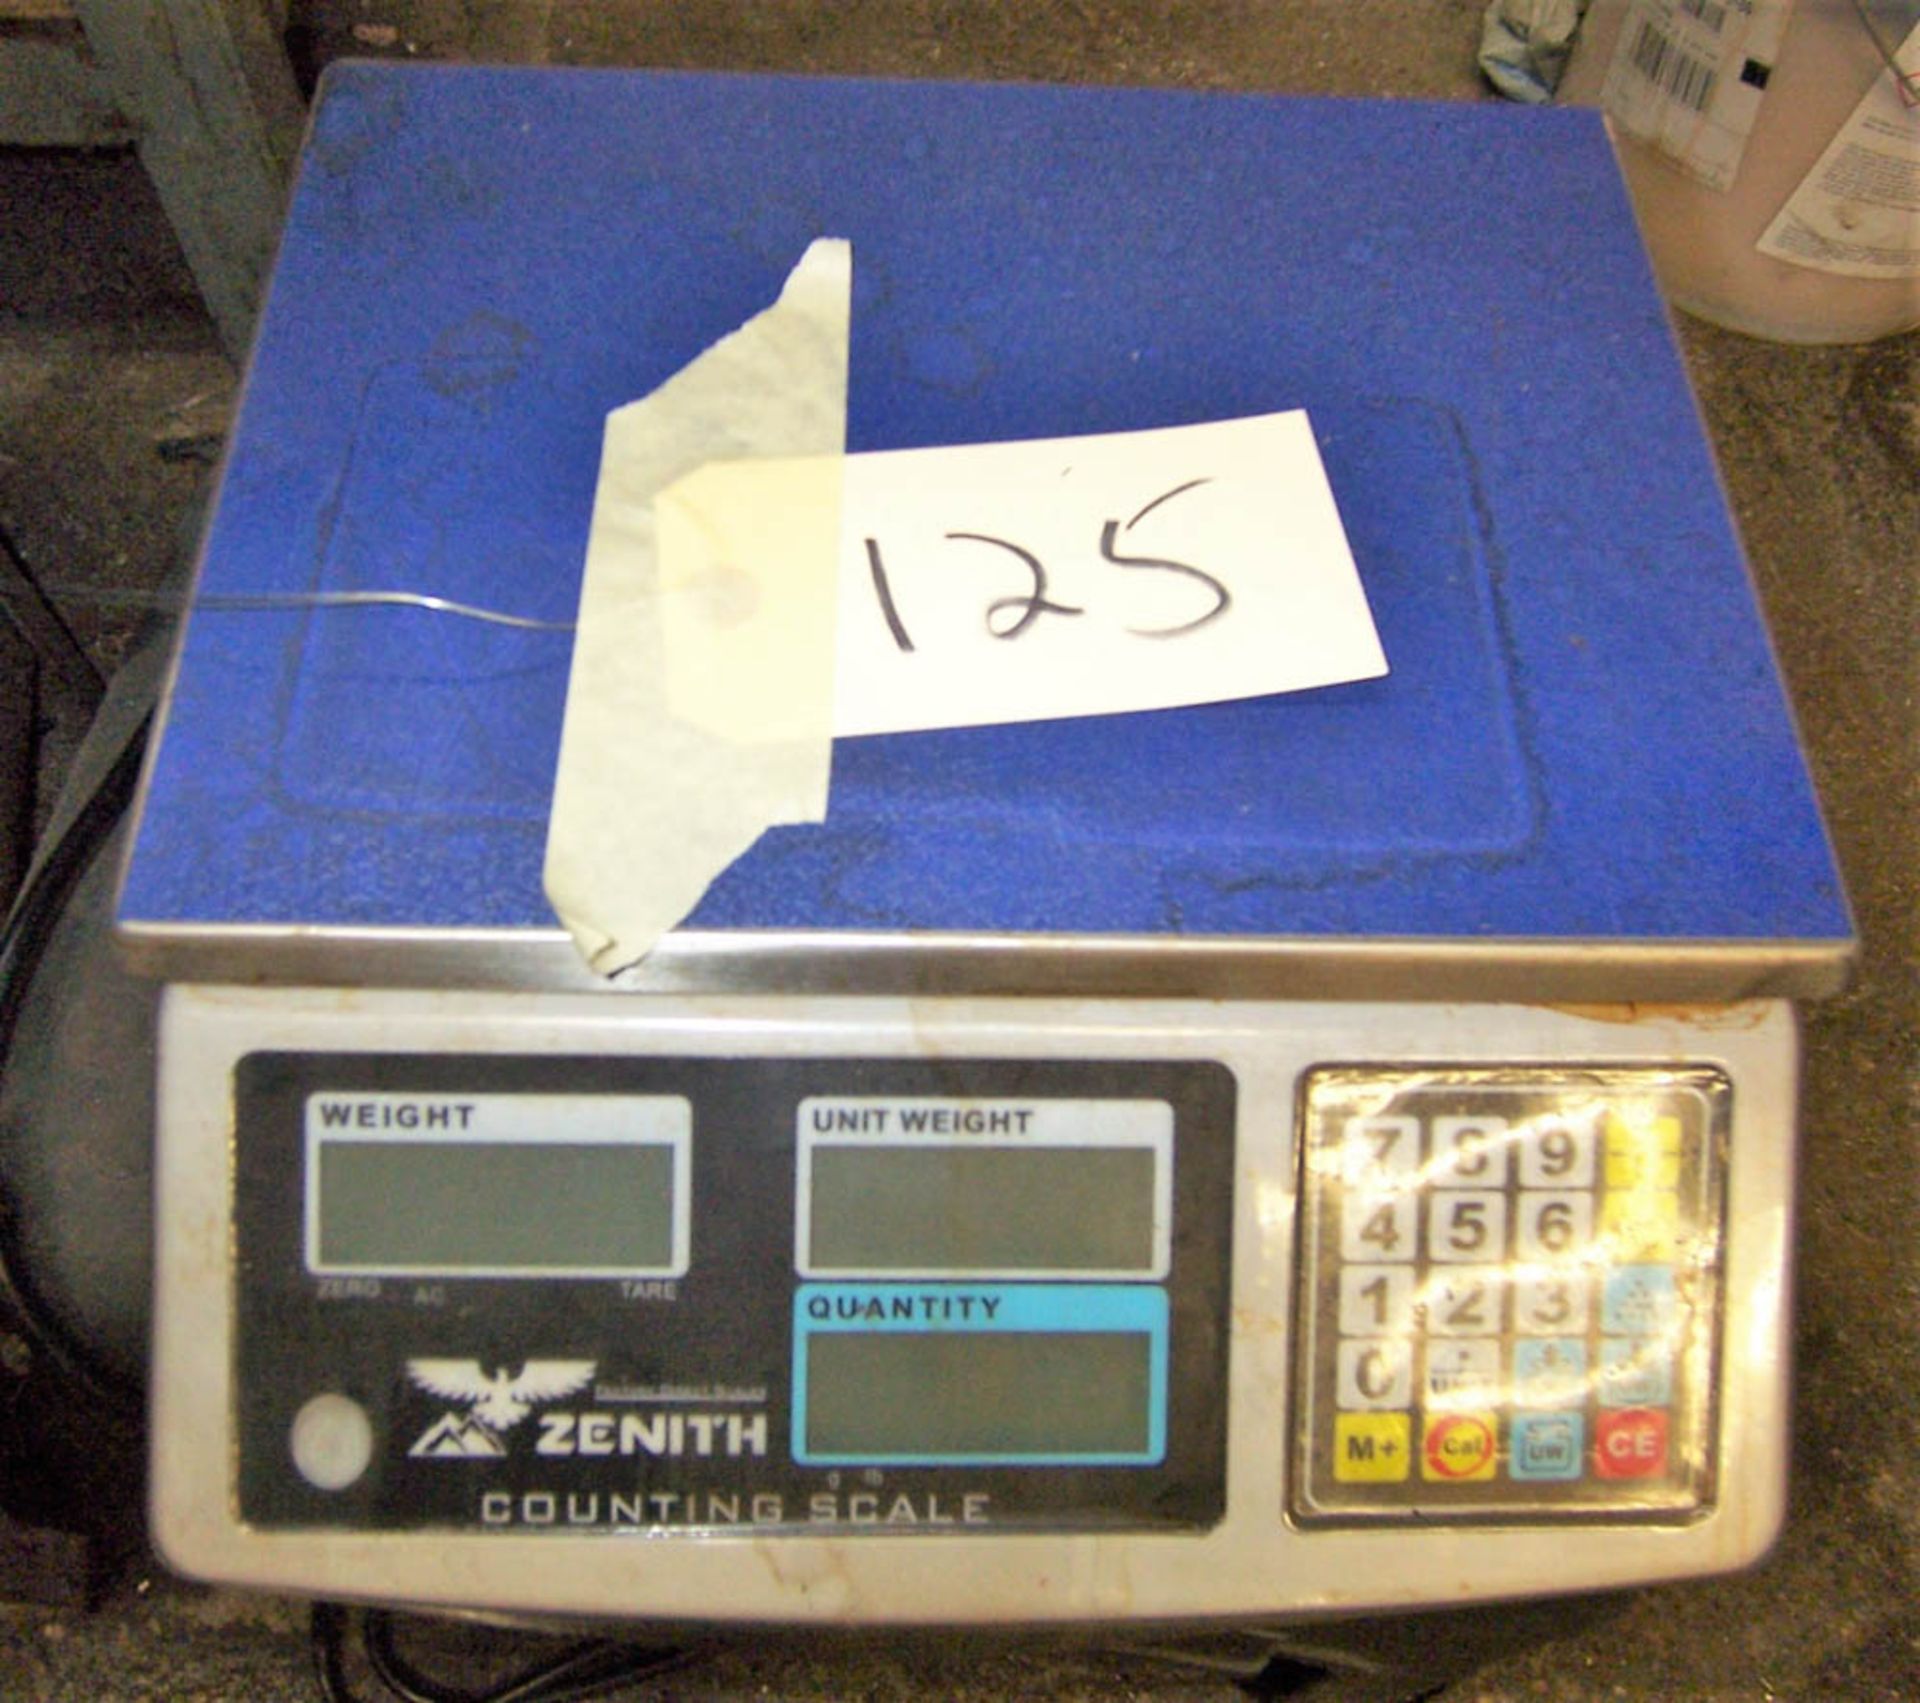 ZENITH DIGITAL COUNTING SCALE